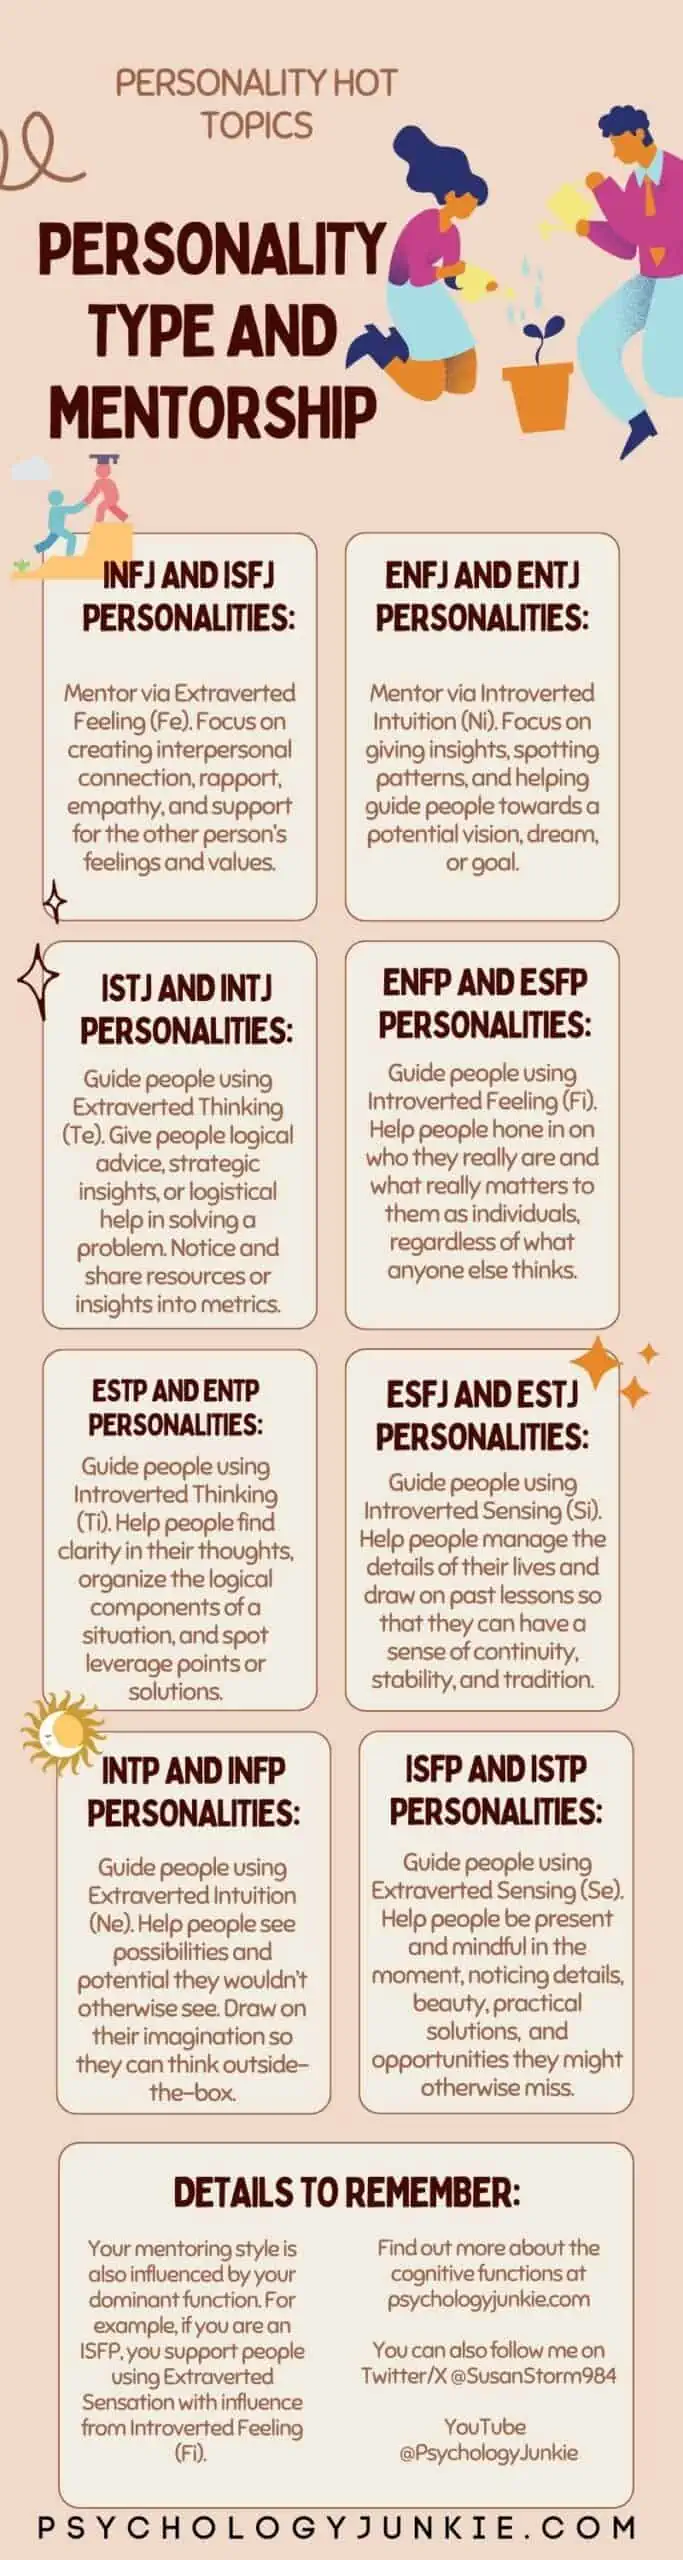 Detailed Guide About the INTJ Personality Type